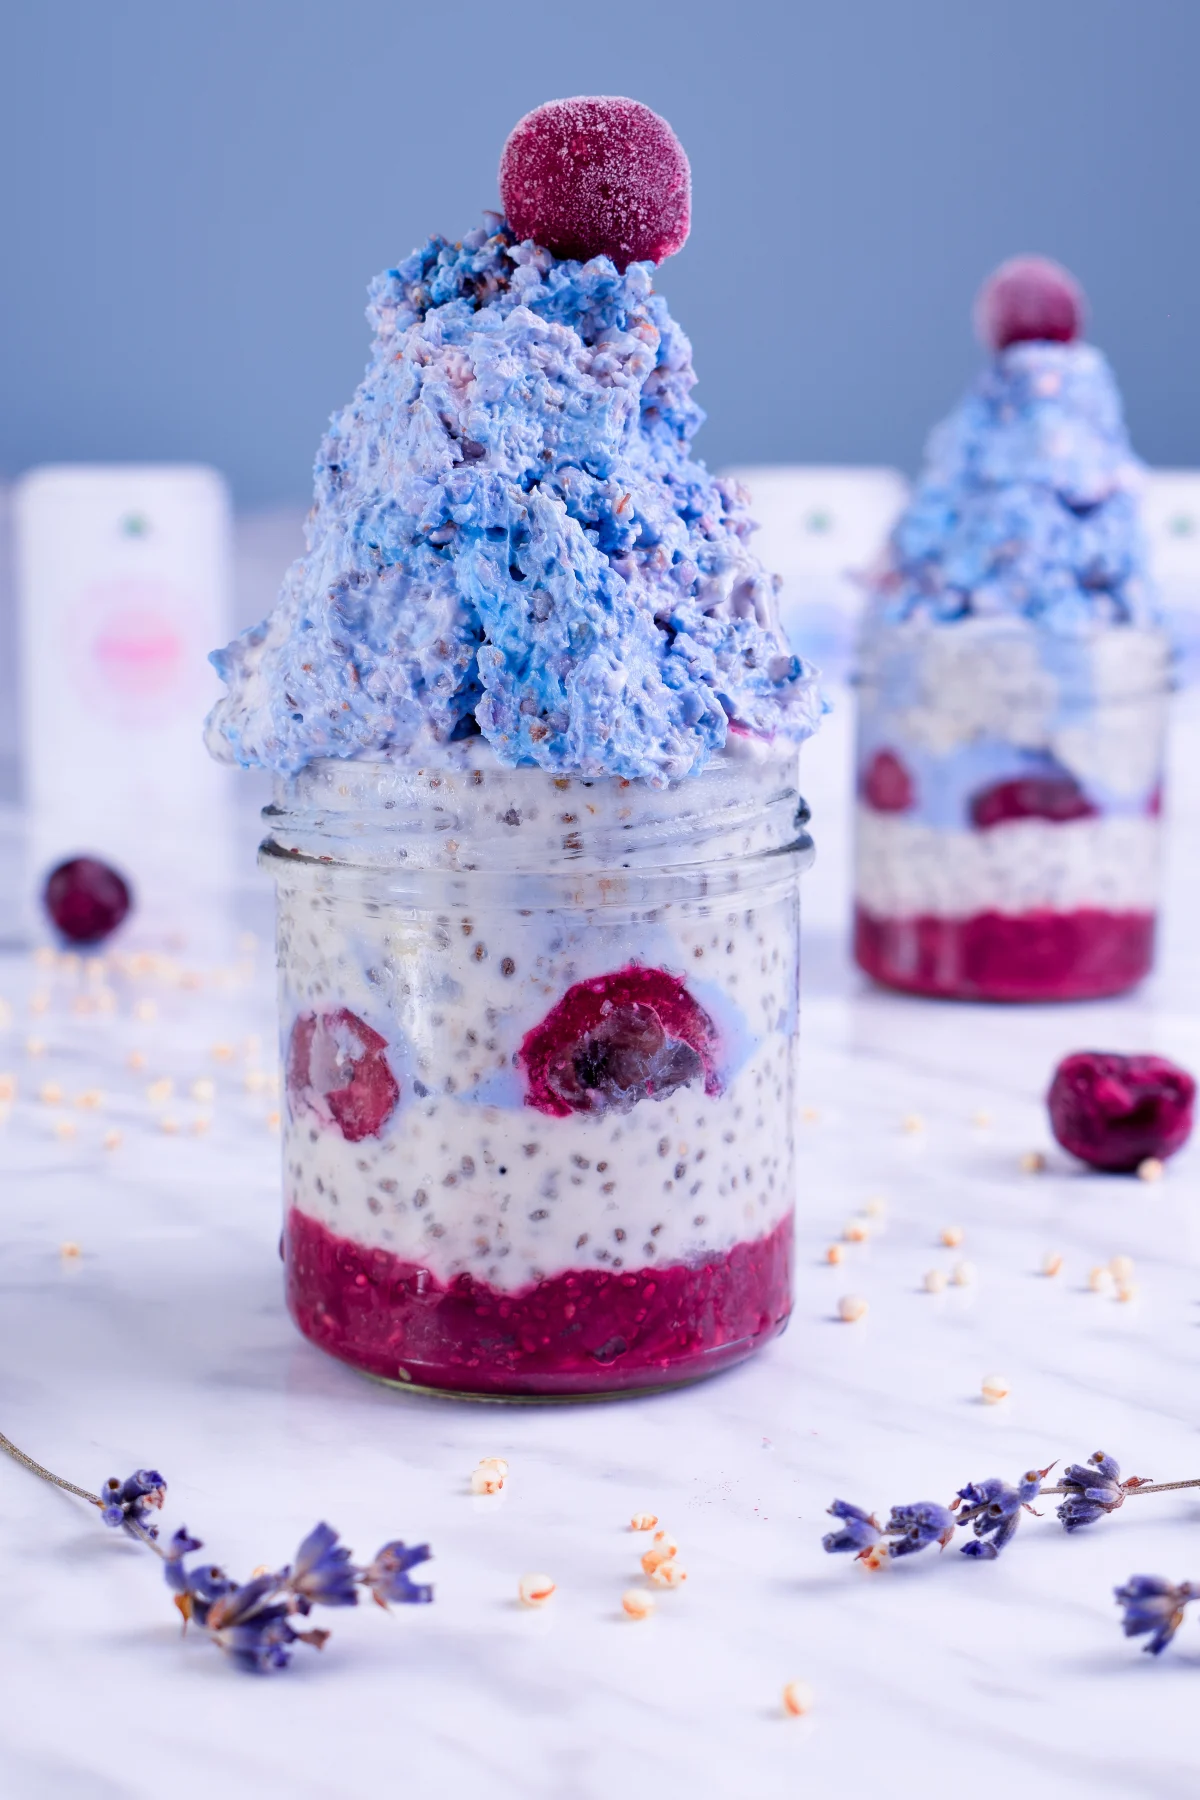 Coconut Chia Pudding with Cherry Jam